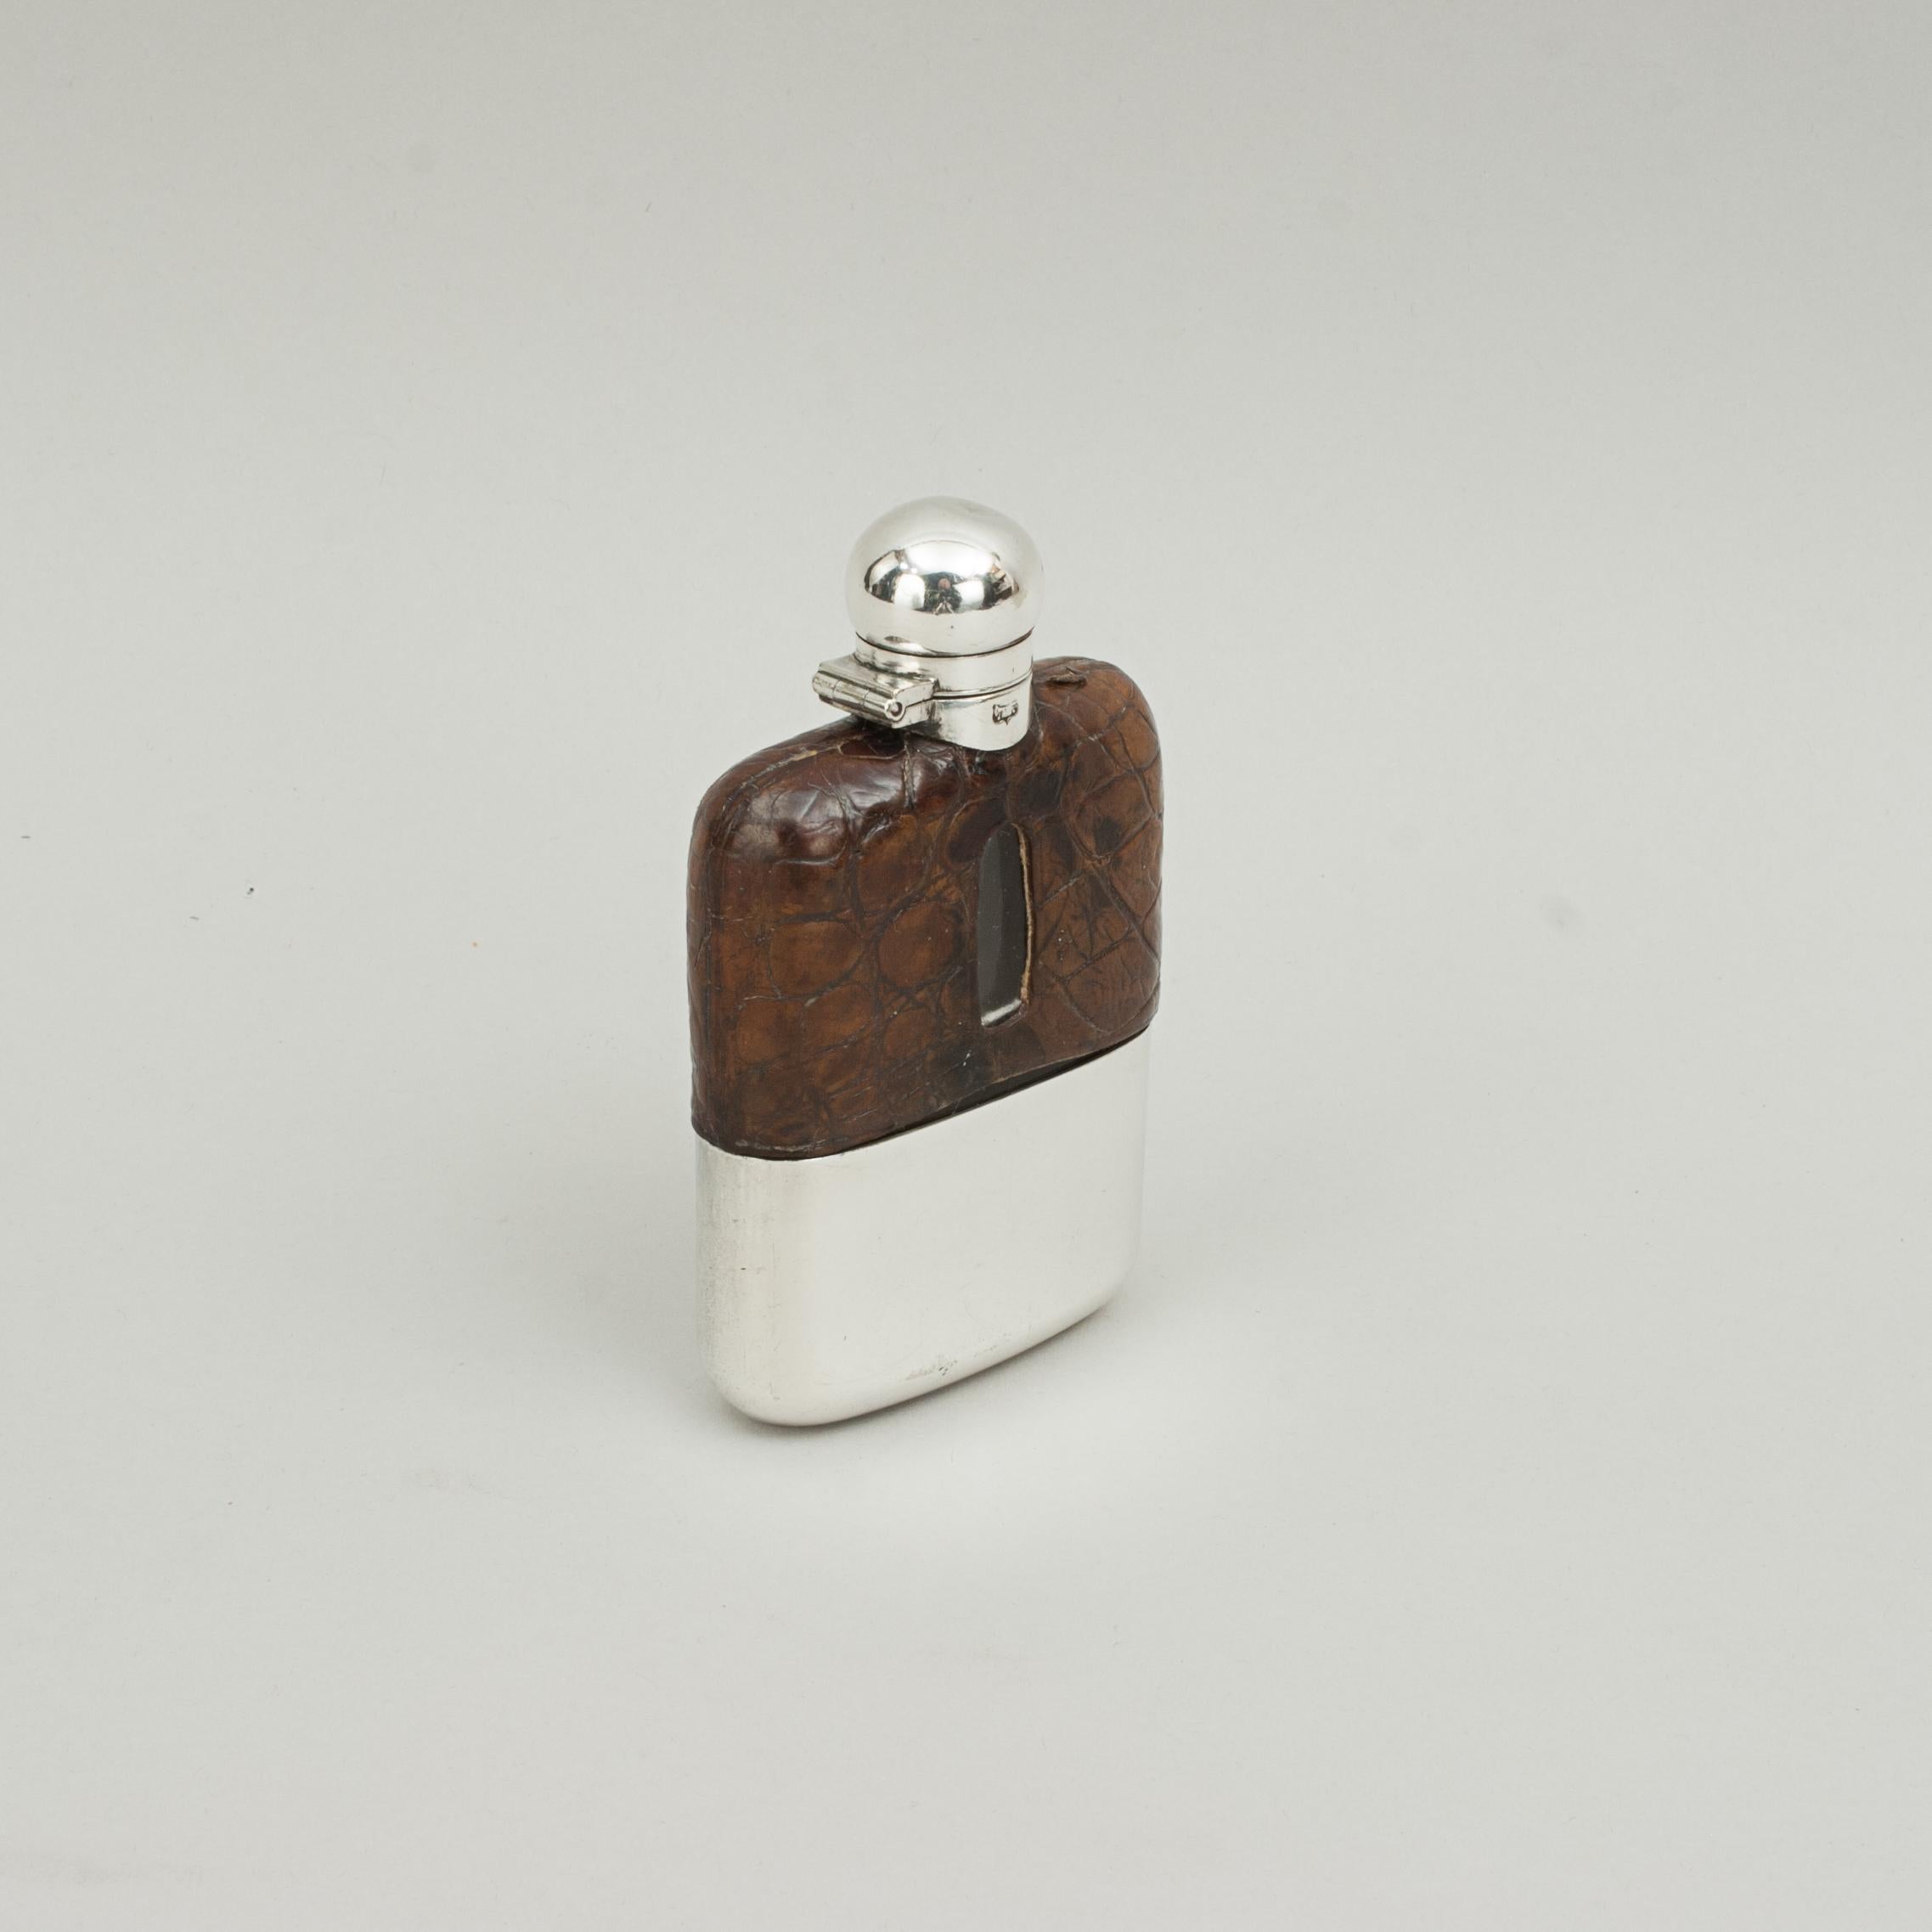 Gentleman's small silver plated hip flask By James Dixon.
A silver-plated spirit hip flask made by James Dixon & Sons, Sheffield. The pocket hip flask has a curved profile, the upper portion of the glass flask ornamented in leather (simulated